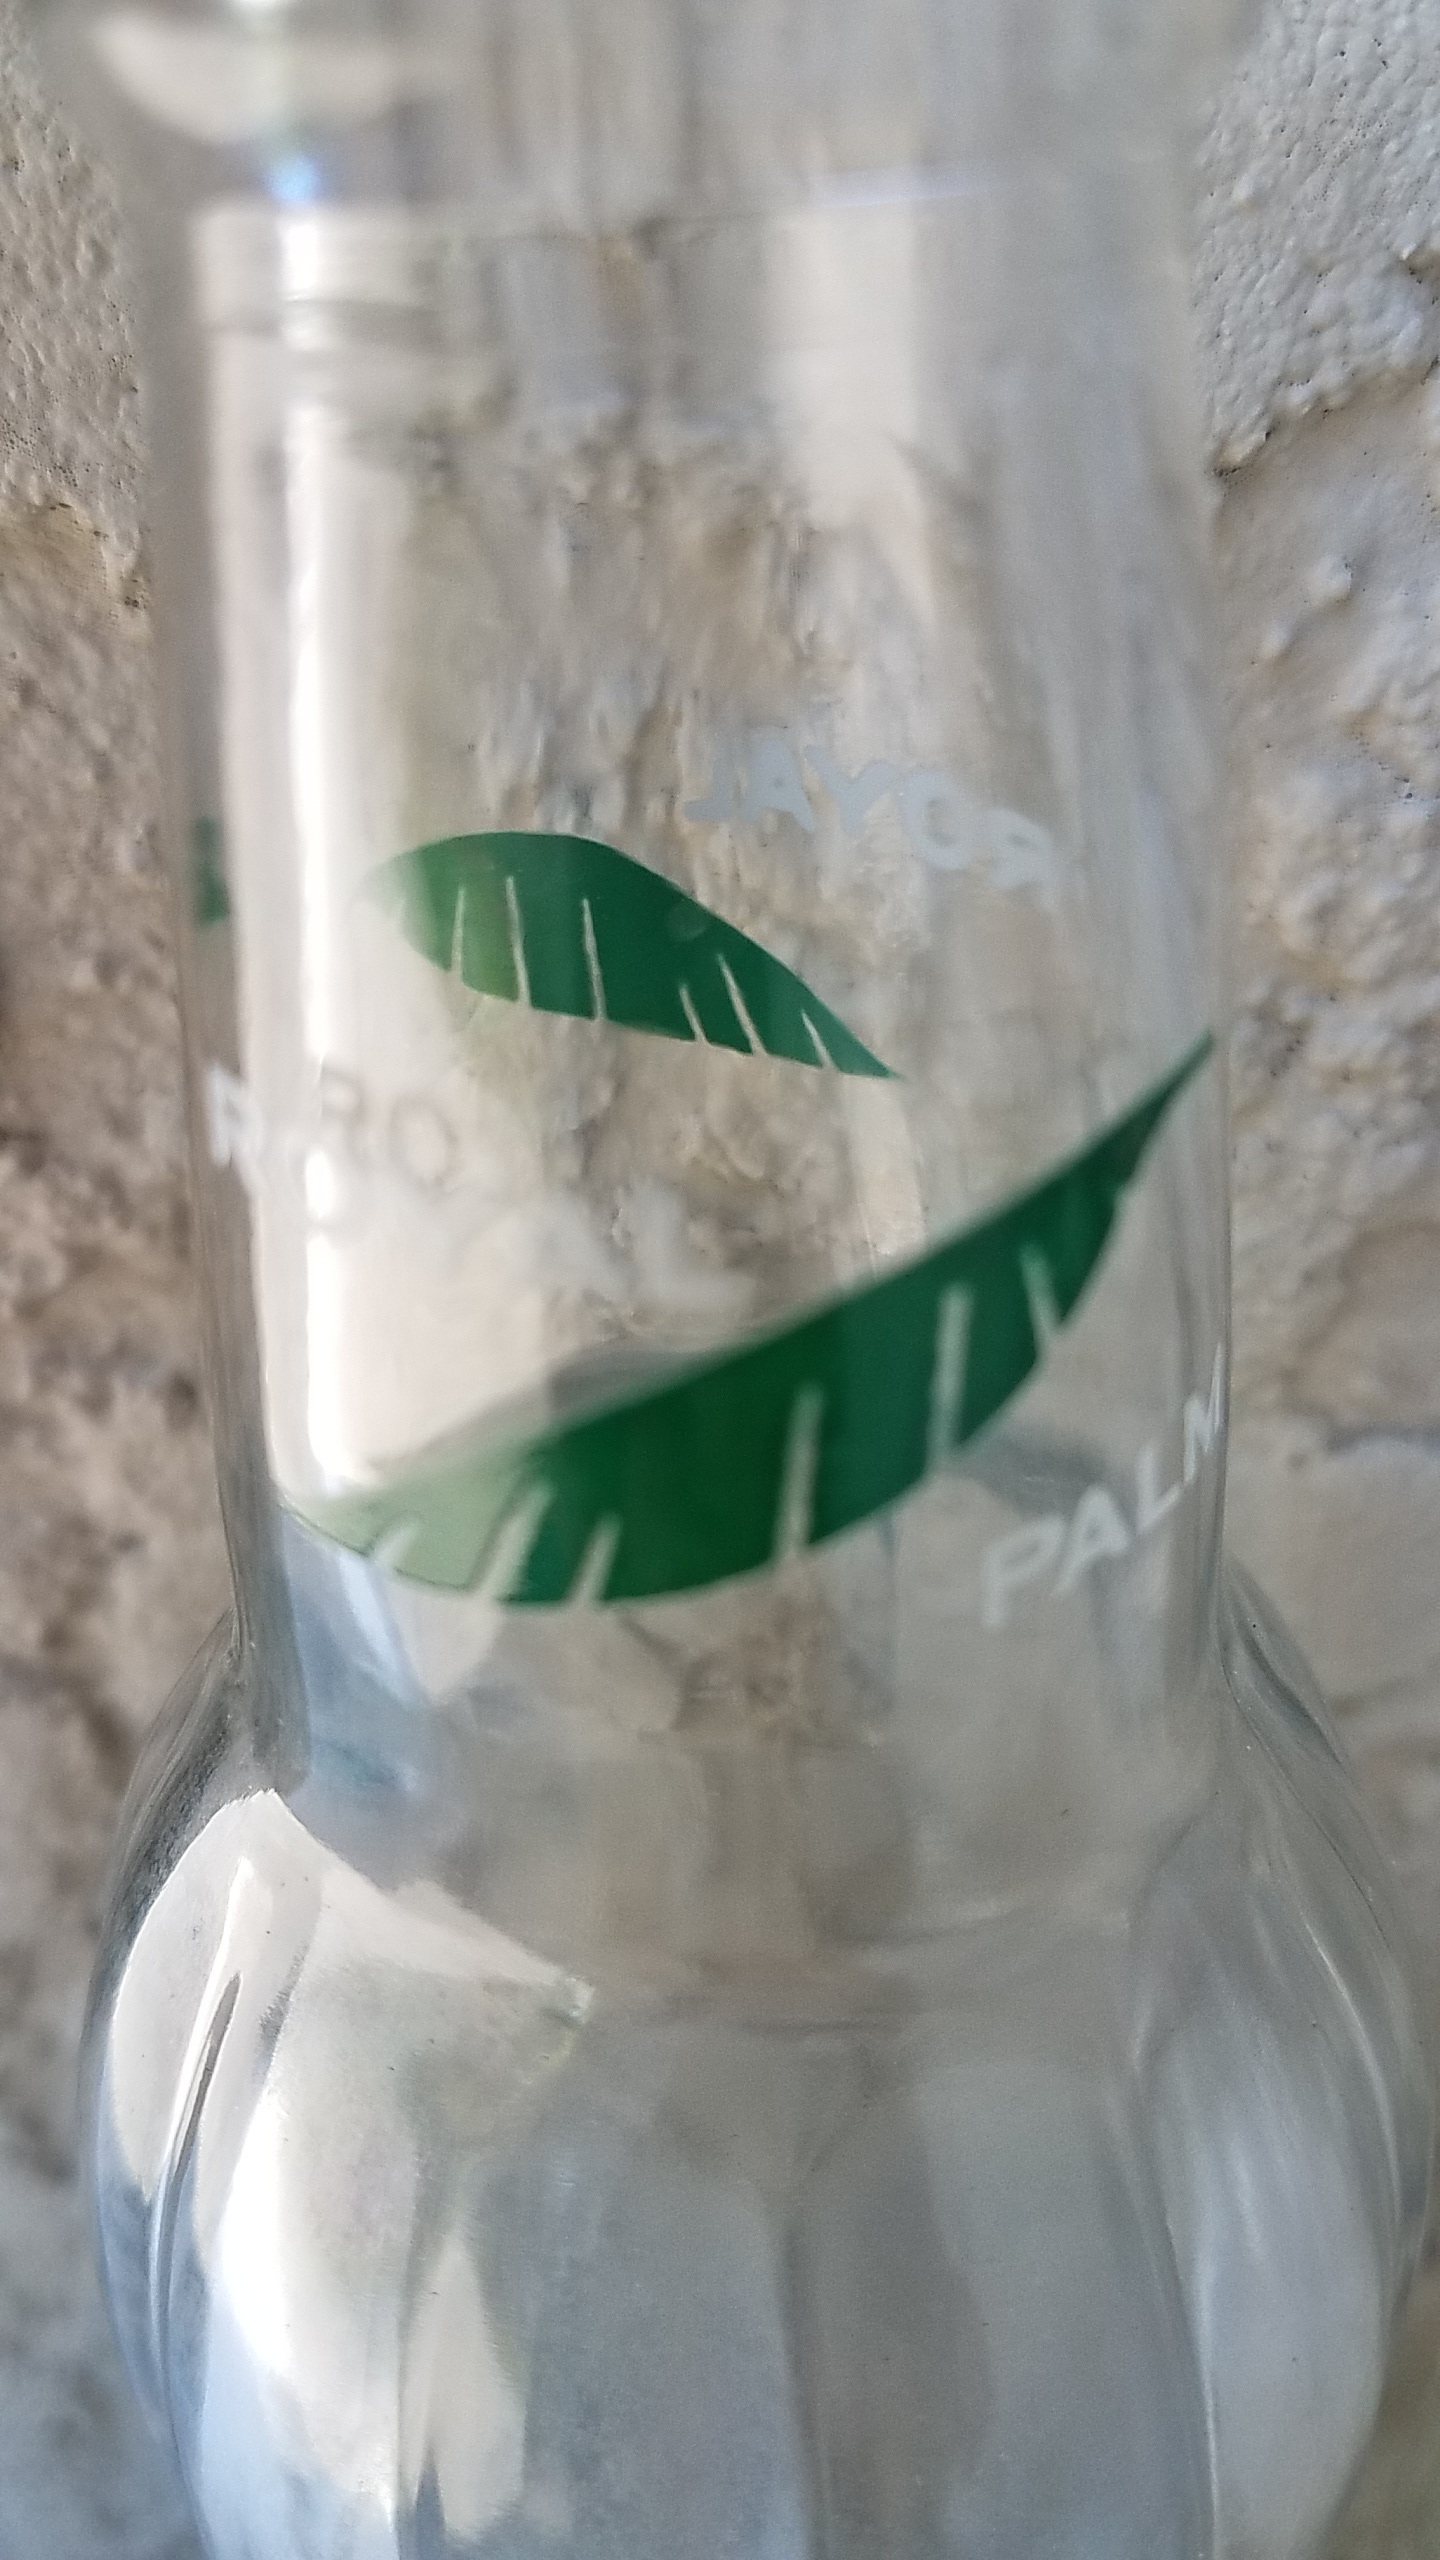 Palm branches on bottle neck